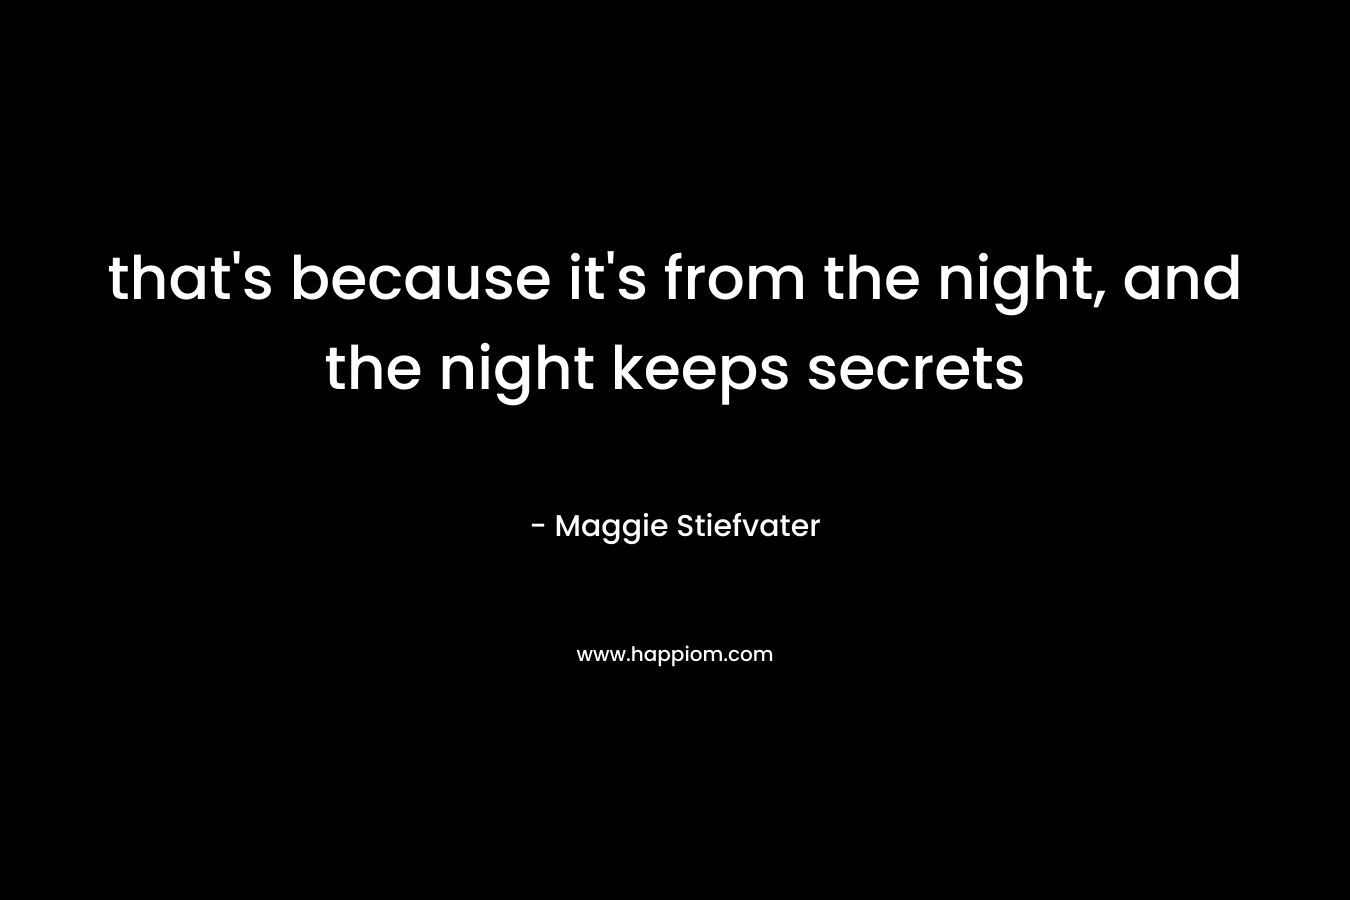 that’s because it’s from the night, and the night keeps secrets – Maggie Stiefvater